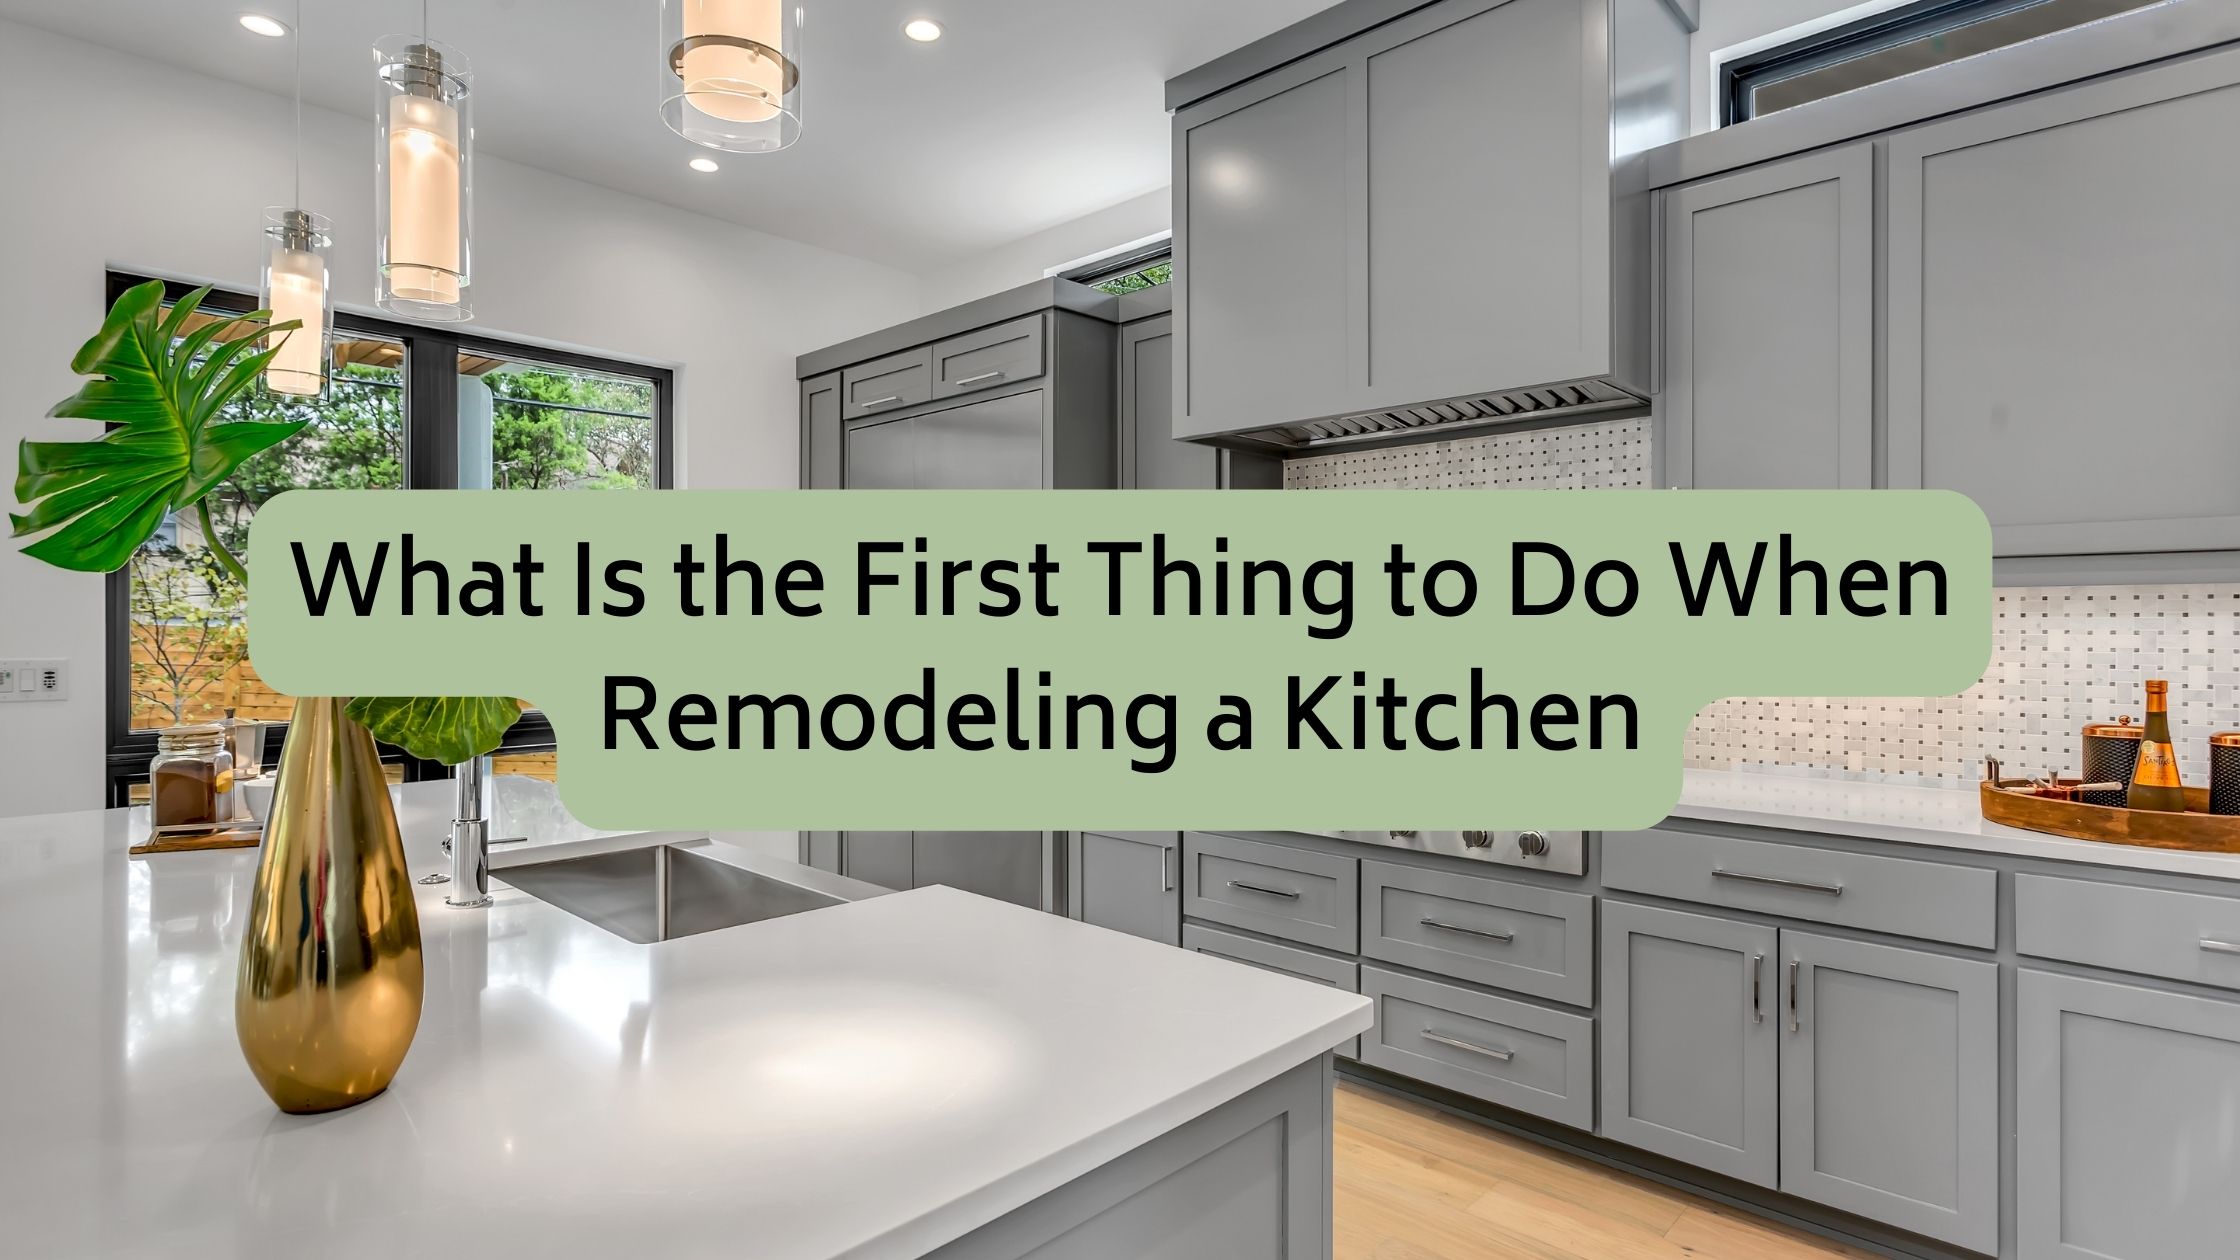 What Is the First Thing to Do When Remodeling a Kitchen